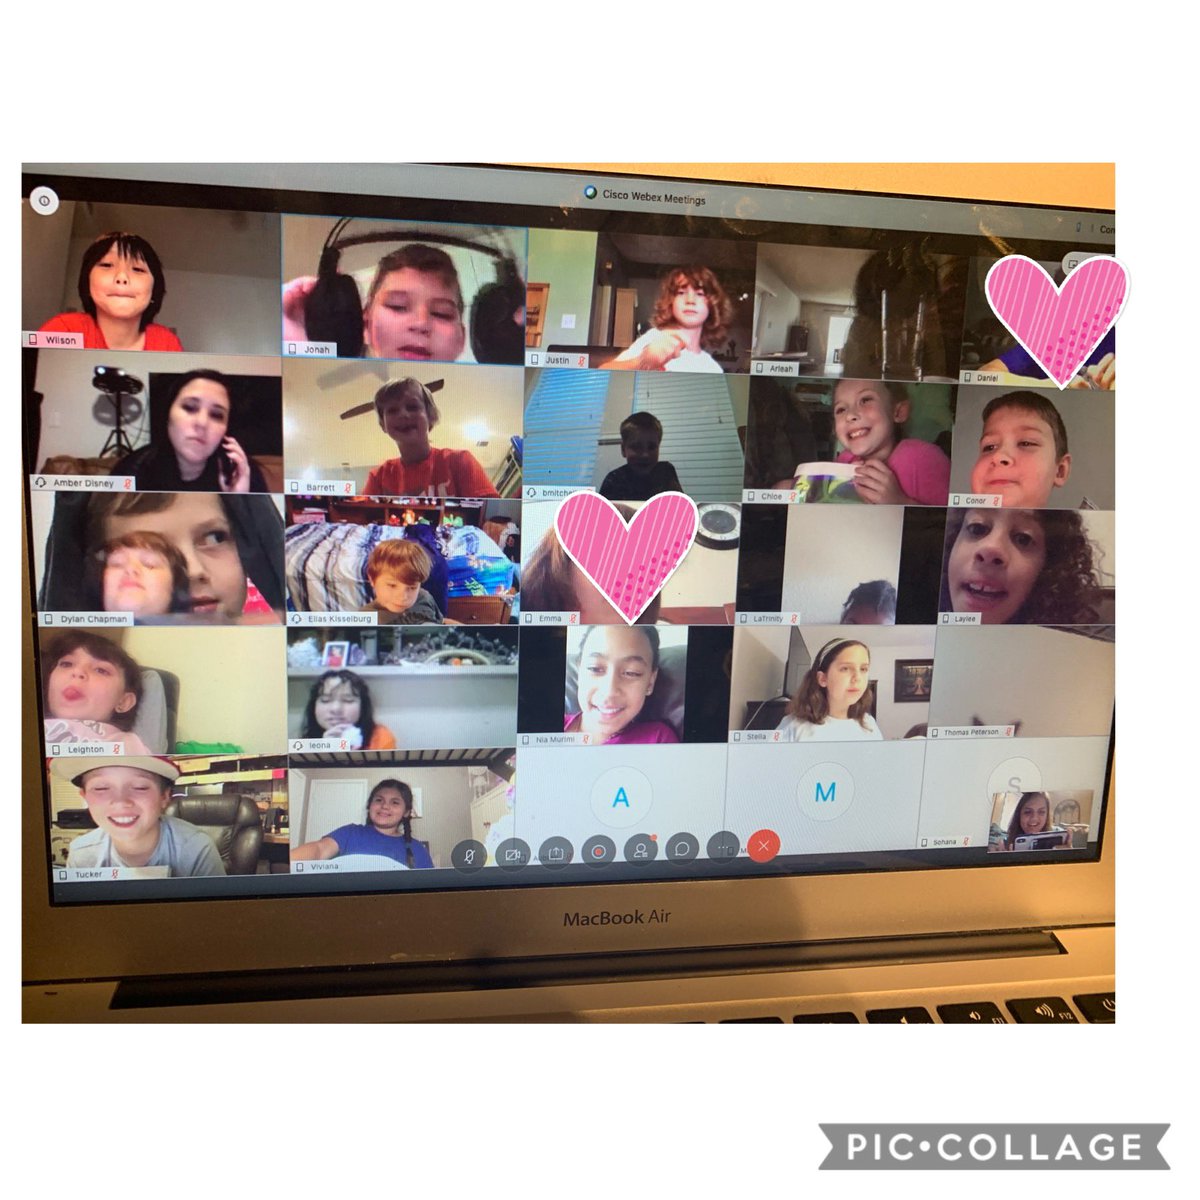 Webex with my crew! Loved seeing these faces! 🤍 #DESisBEST #Disbergs #Face2FaceFriday